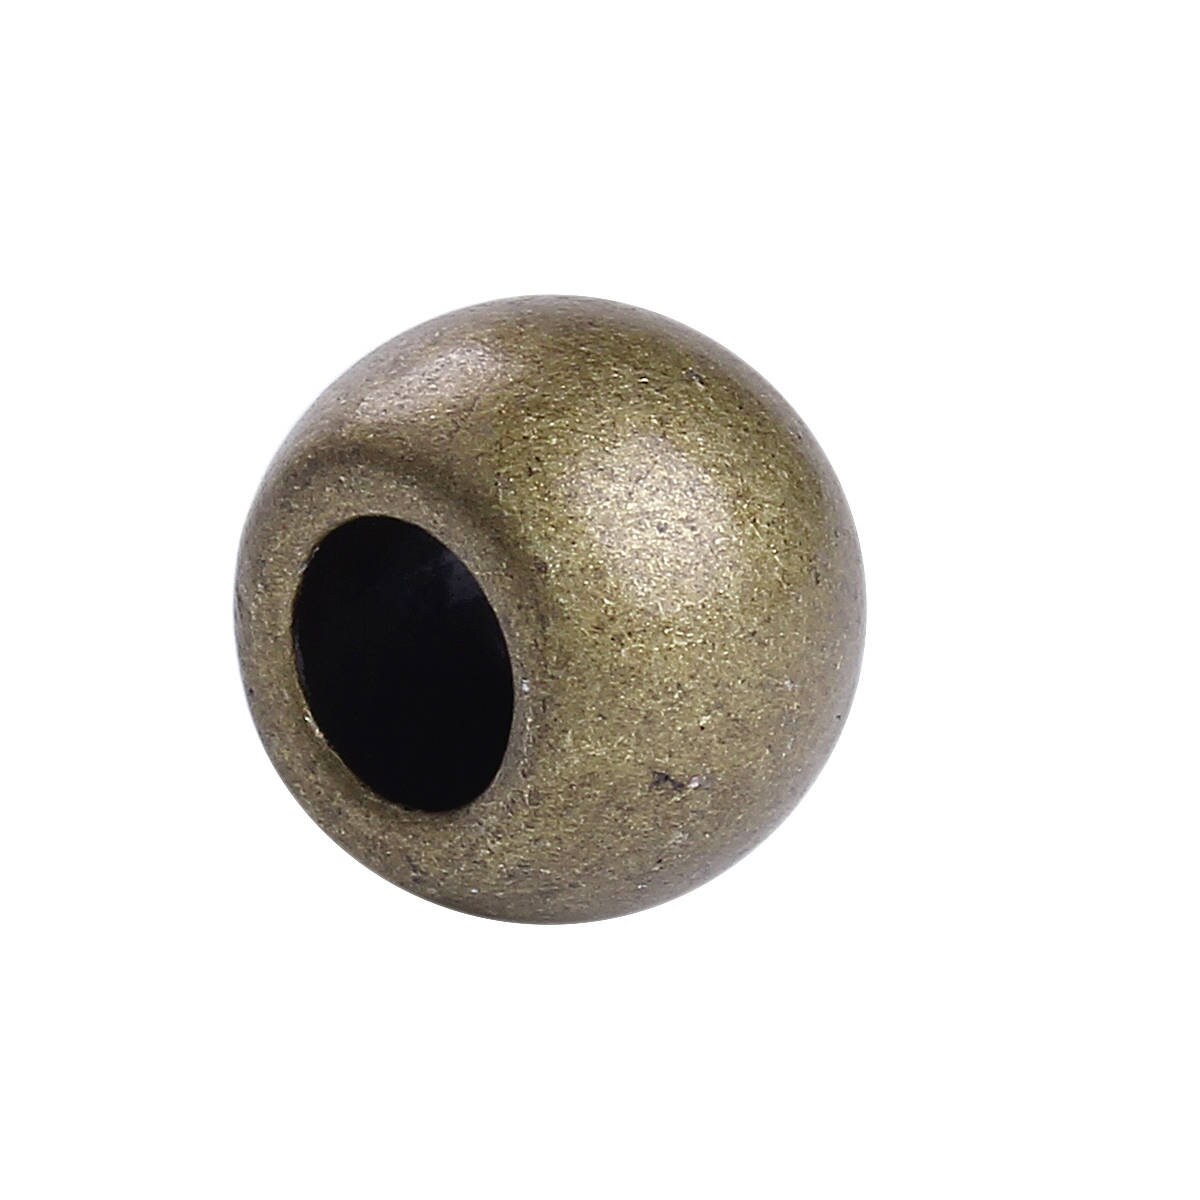 Solid Brass Ball Beads, Brass Ball Spacer Beads, Raw Brass Beads, 6mm Raw  Brass Balls, Brass Findings, Brass Spacers, 25 Pc